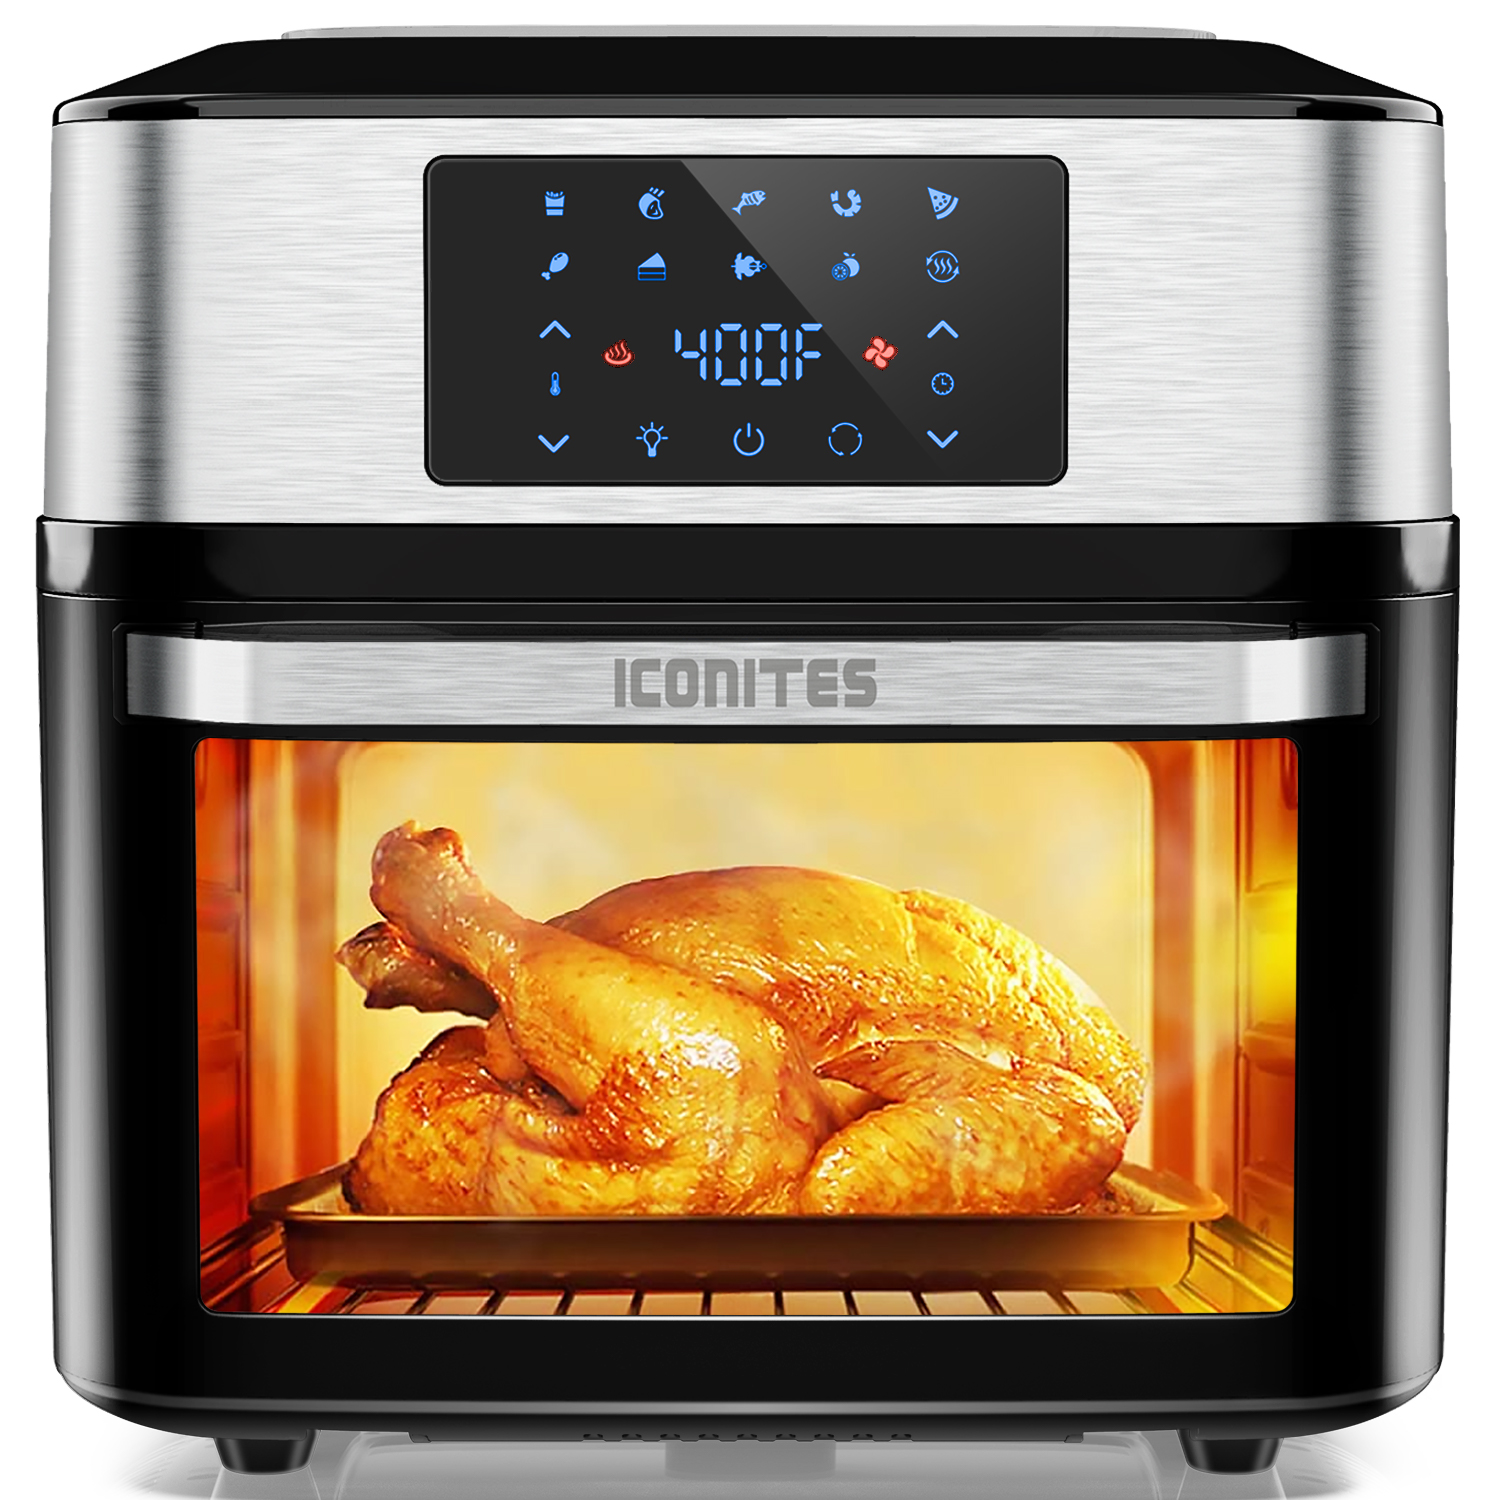 Iconites 20 Quart Air Fryer 10-in-1 Toaster Oven AO1202K with Rotisserie Black Airfryer on Sale 20 qt - image 1 of 9